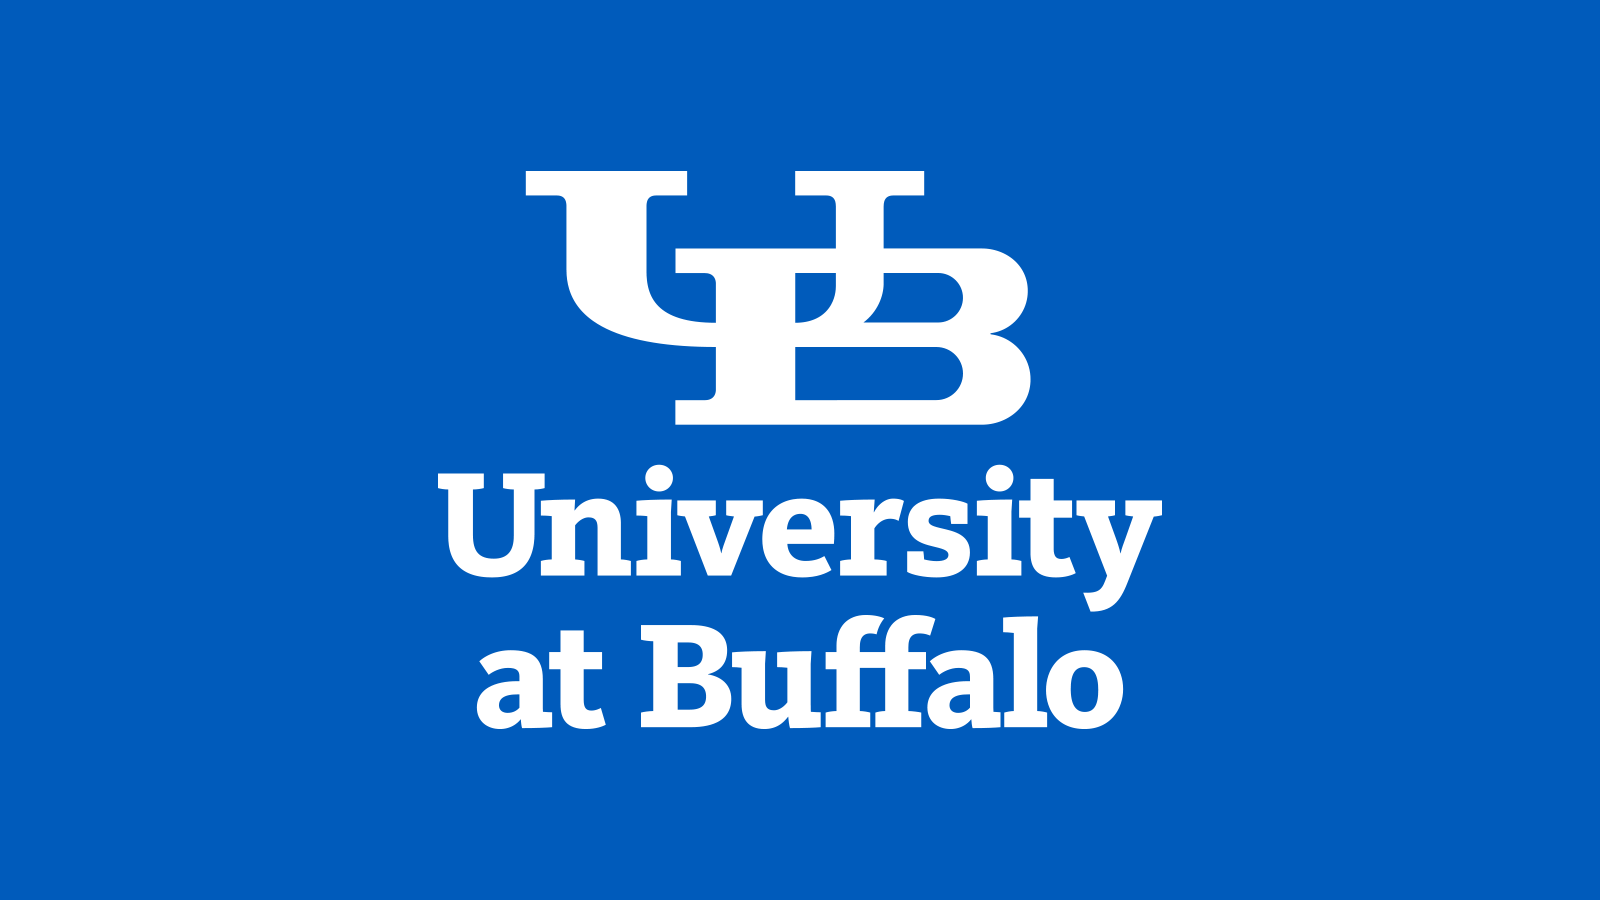 Kennedy to deliver Mitchell lecture – UBNow: News and views for UB faculty and staff